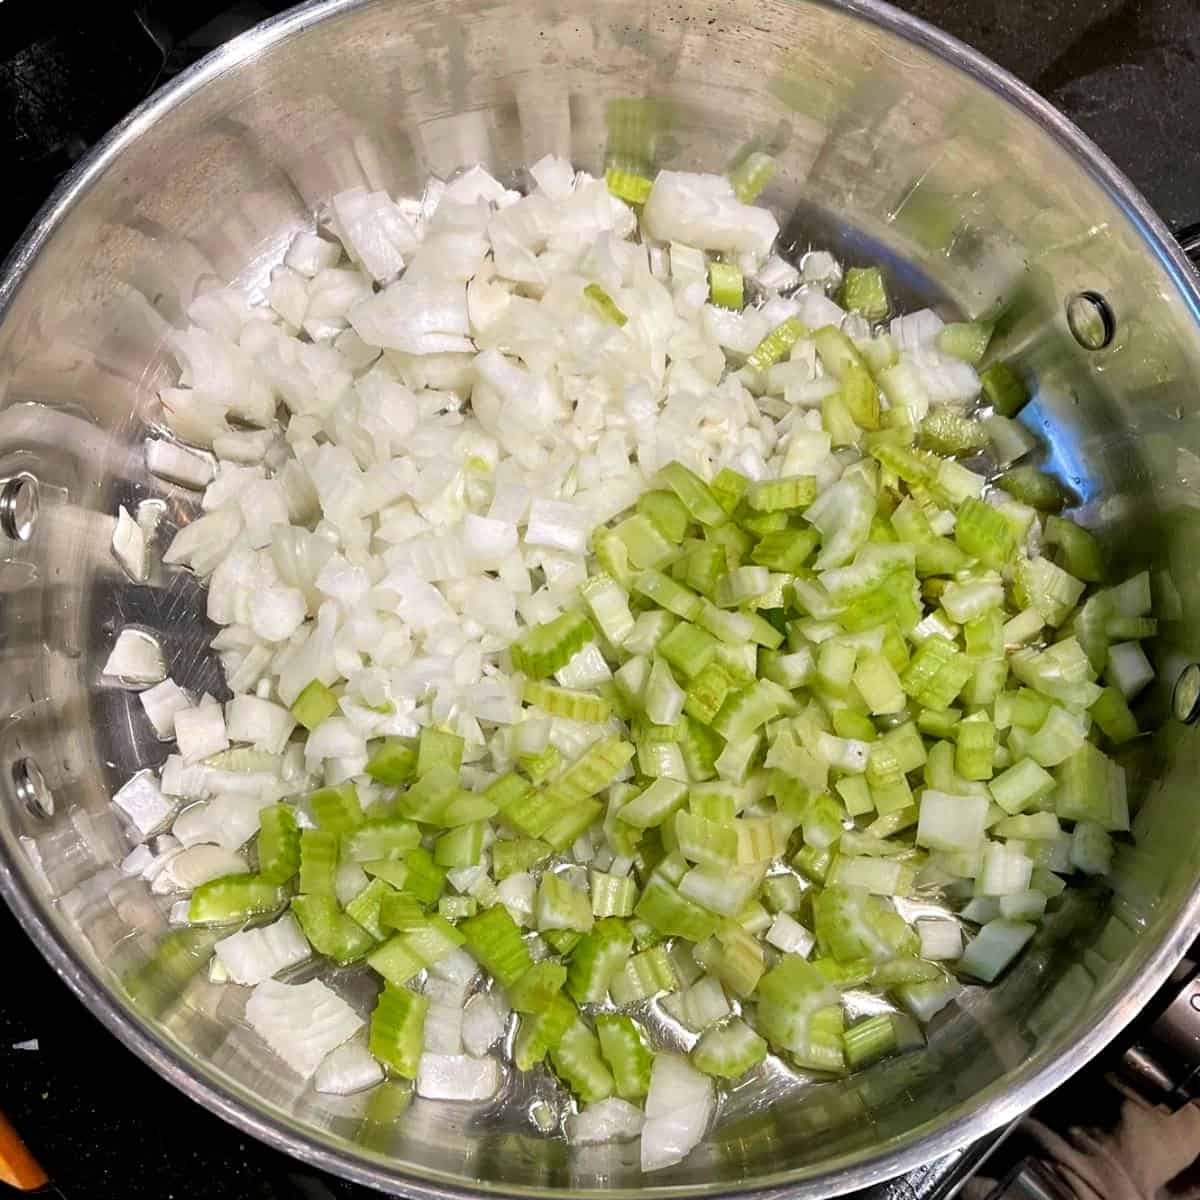 Celery and onions in skillet.